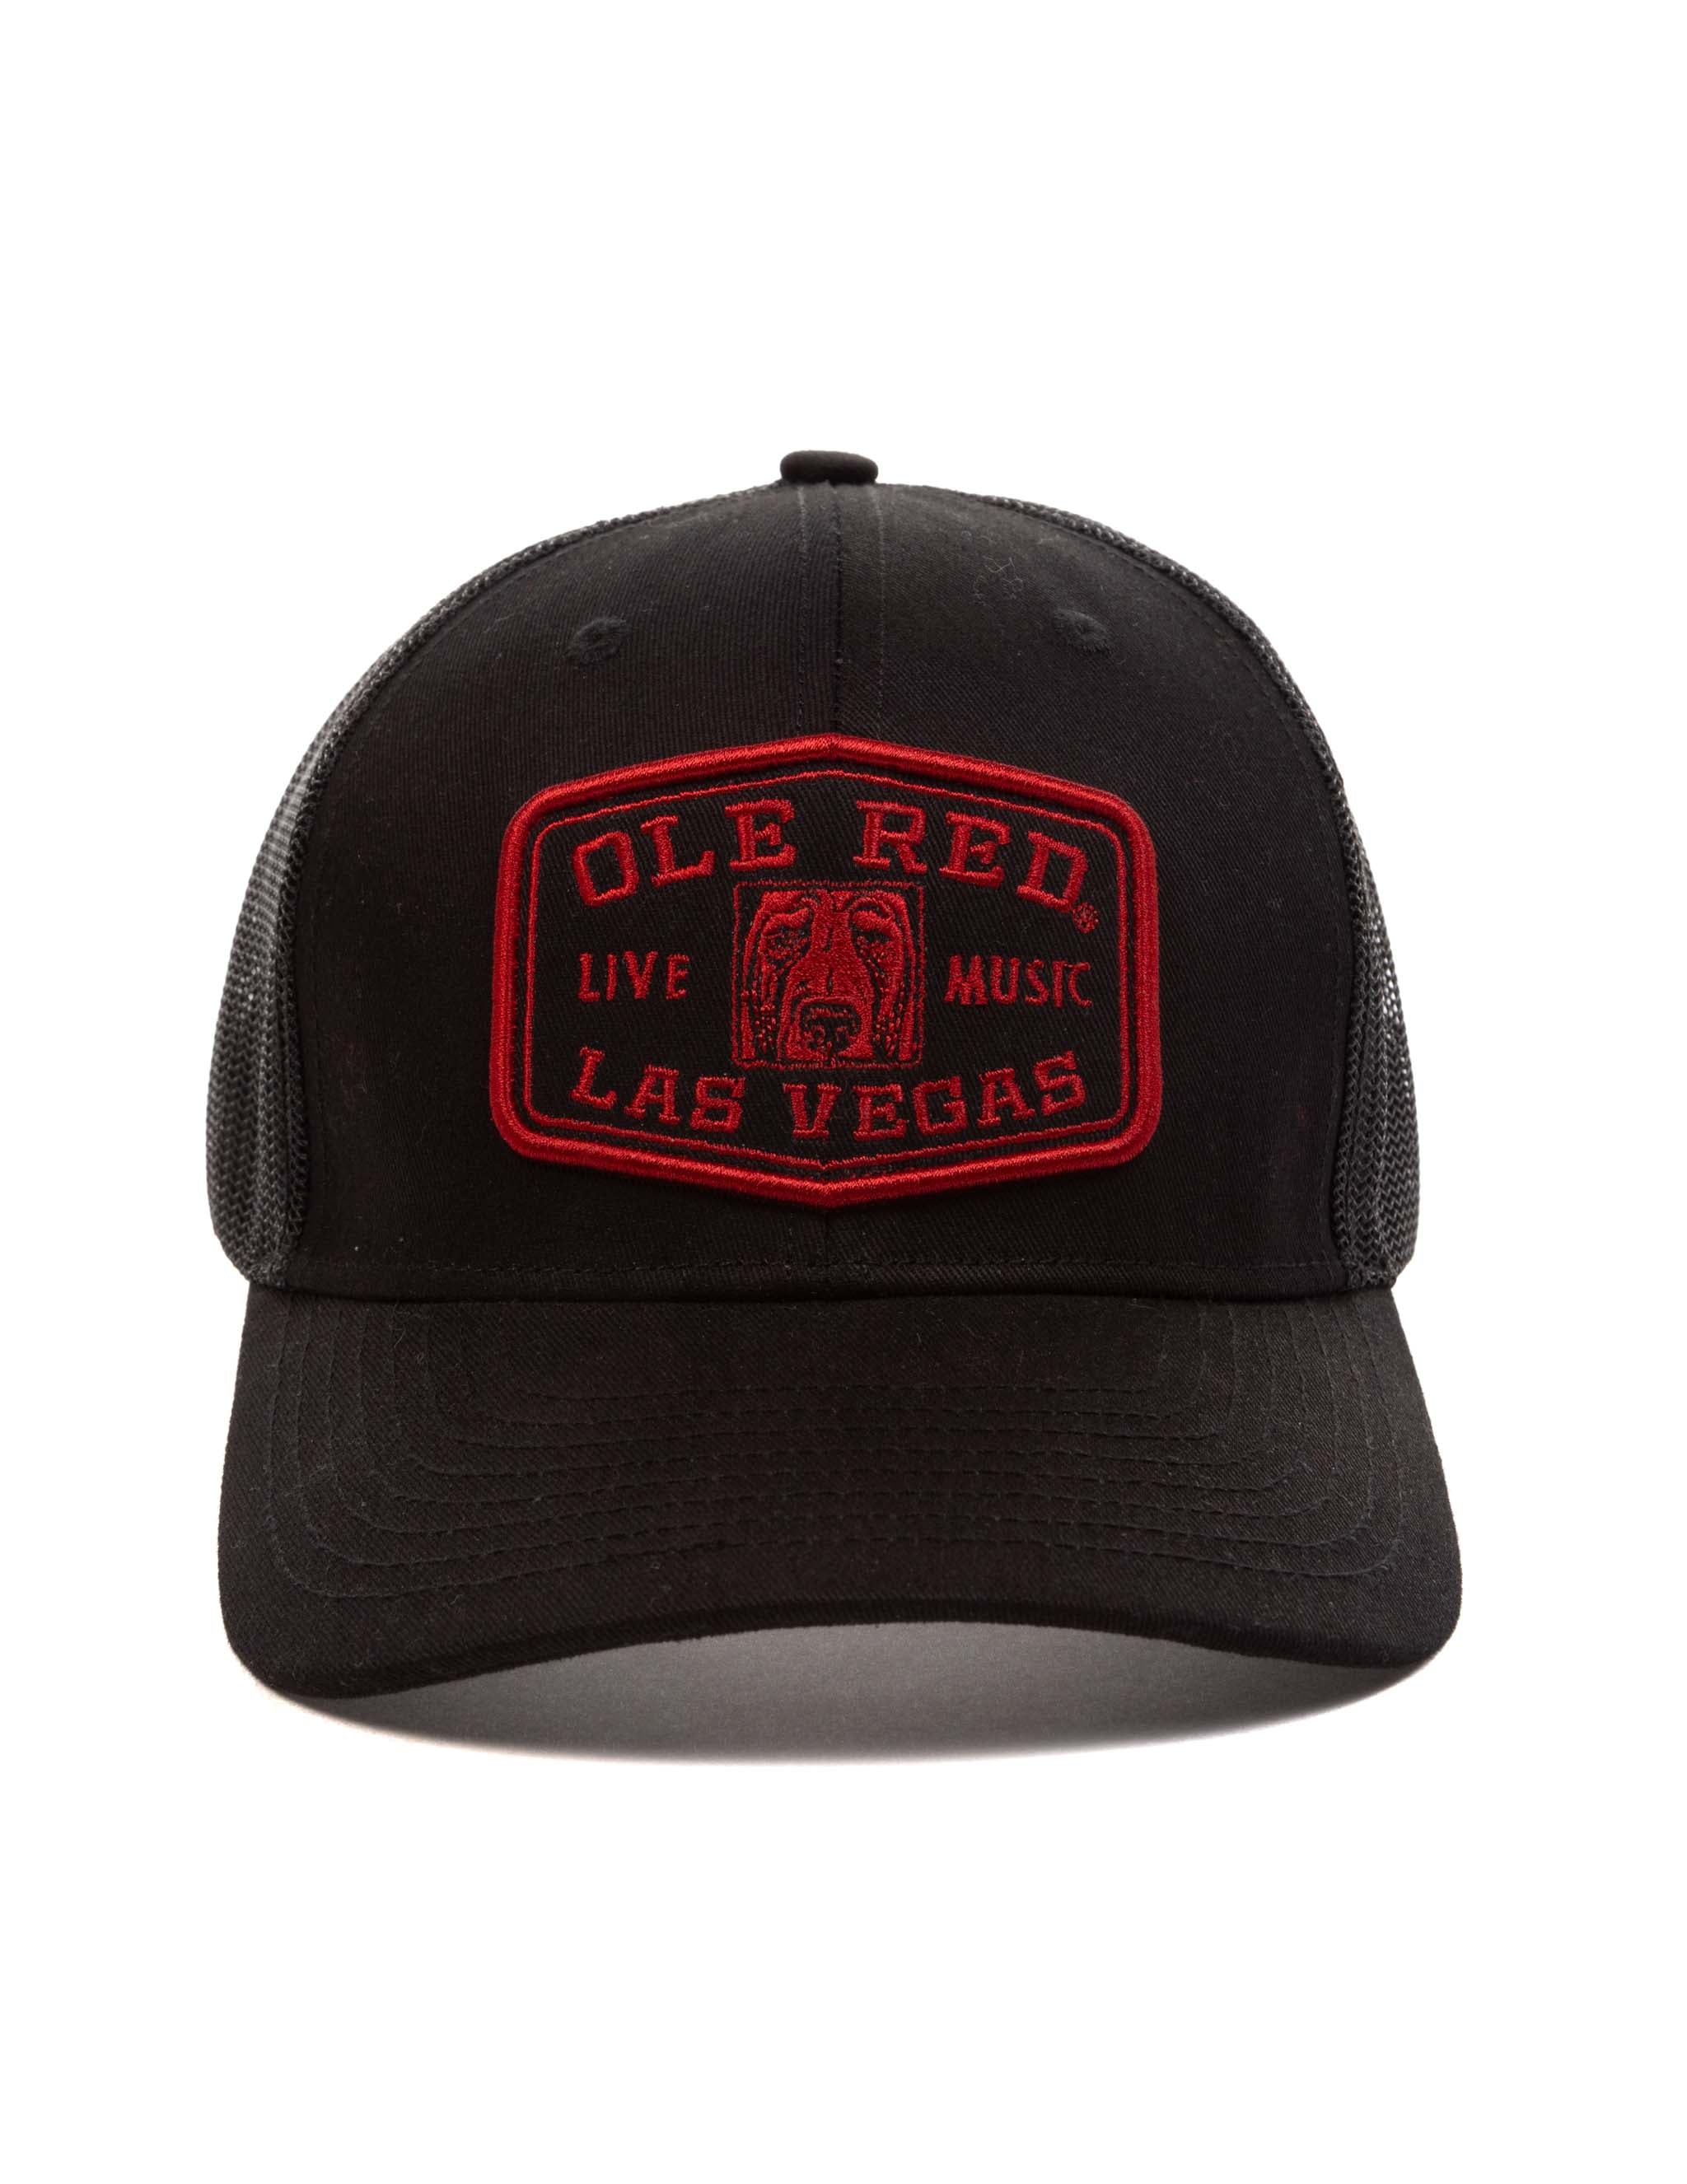 Ole Red Vegas Live Music Hat